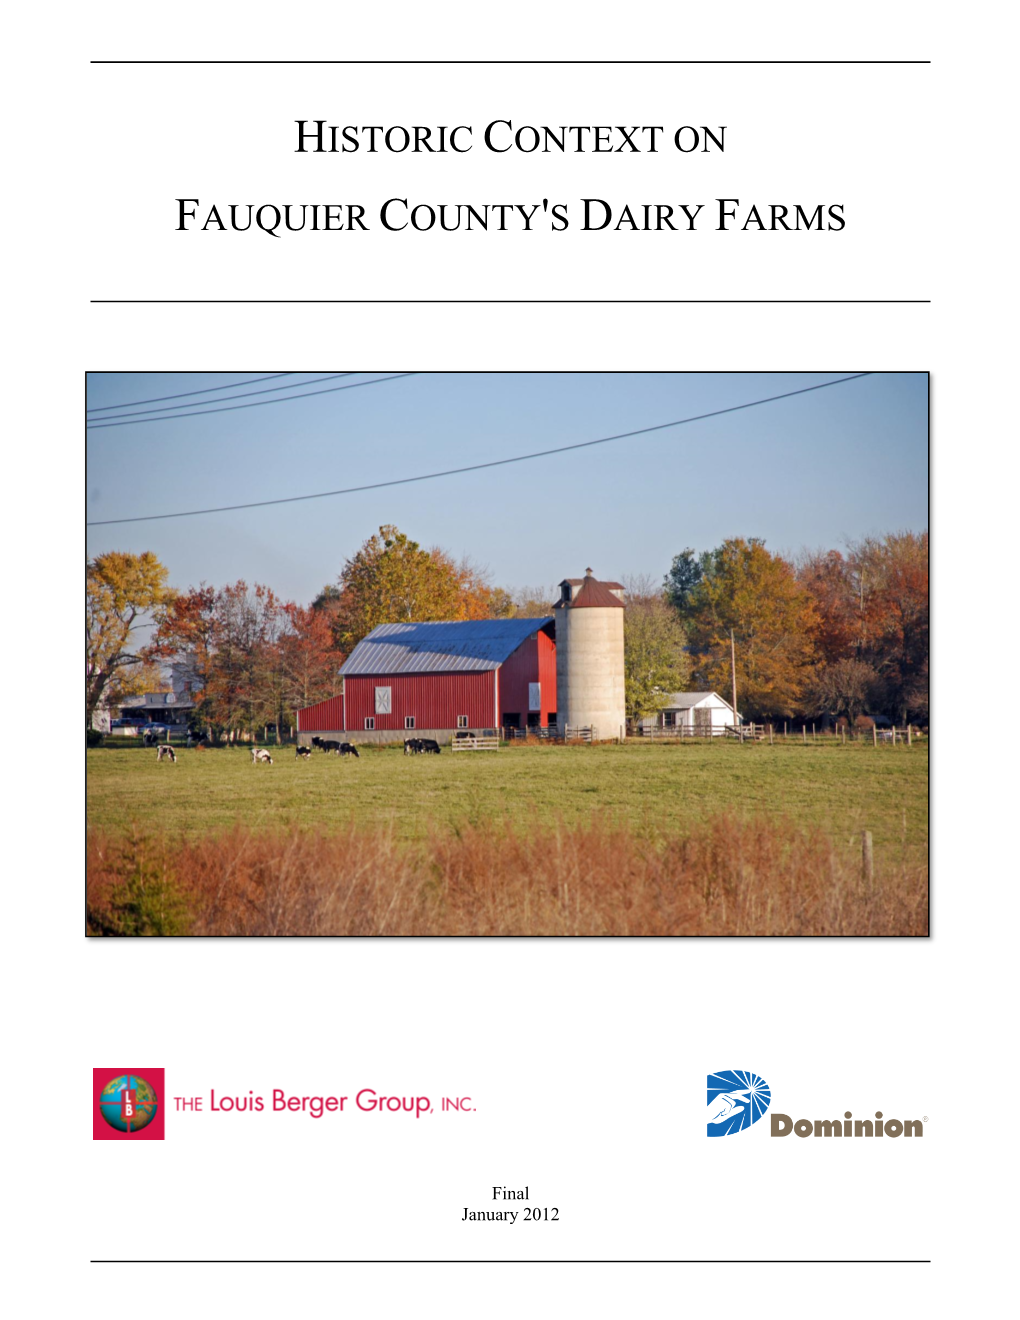 Historic Context on Fauquier County's Dairy Farms